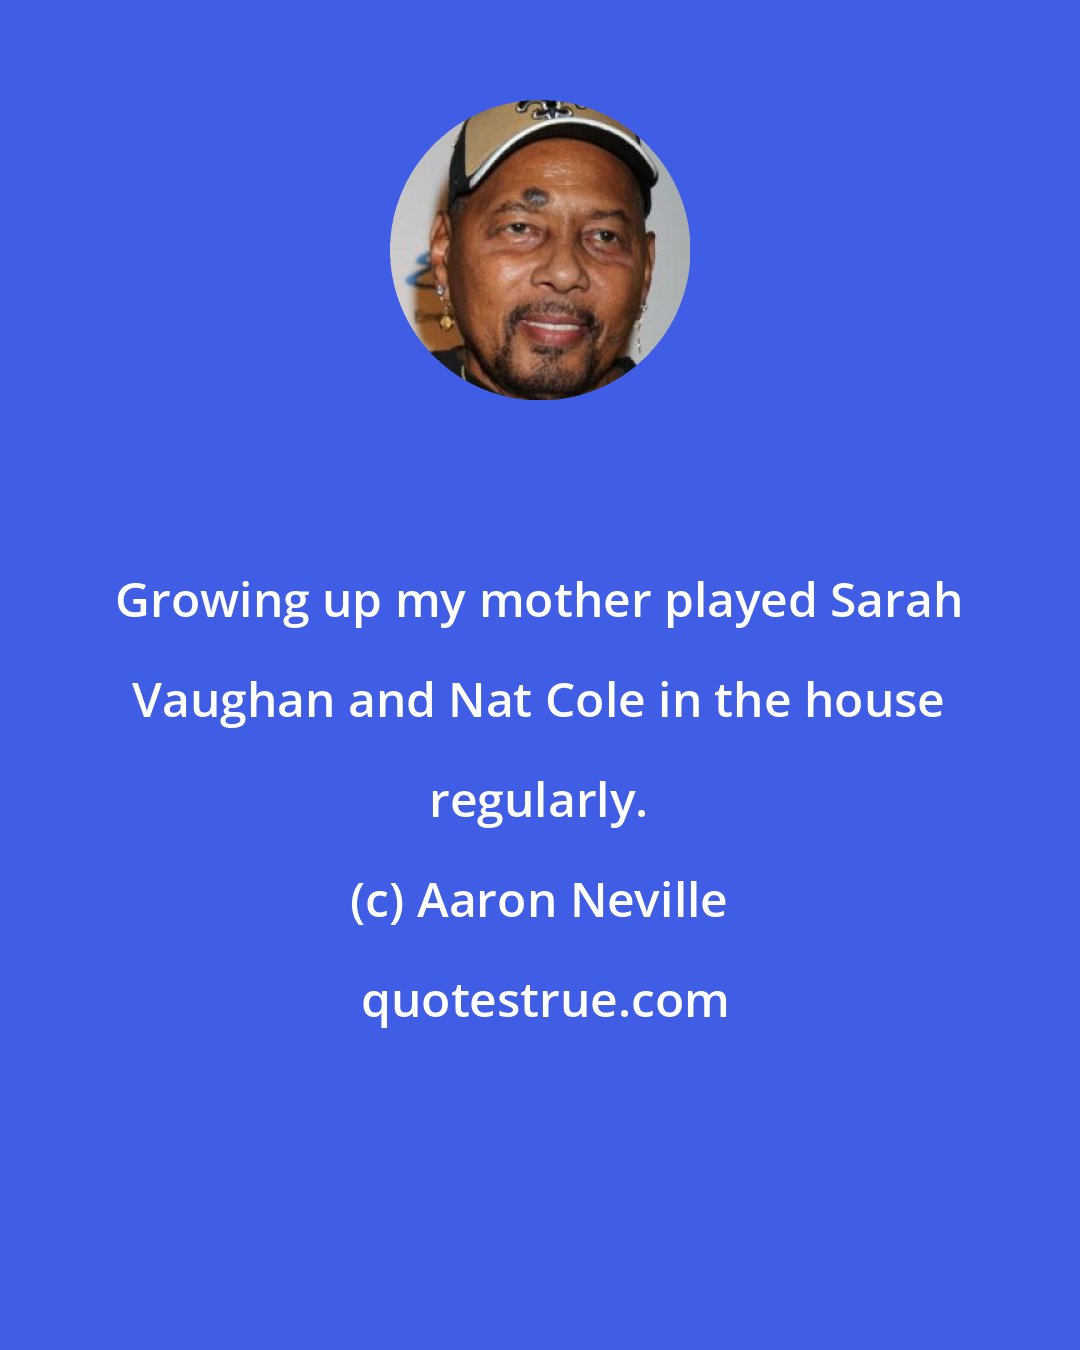 Aaron Neville: Growing up my mother played Sarah Vaughan and Nat Cole in the house regularly.